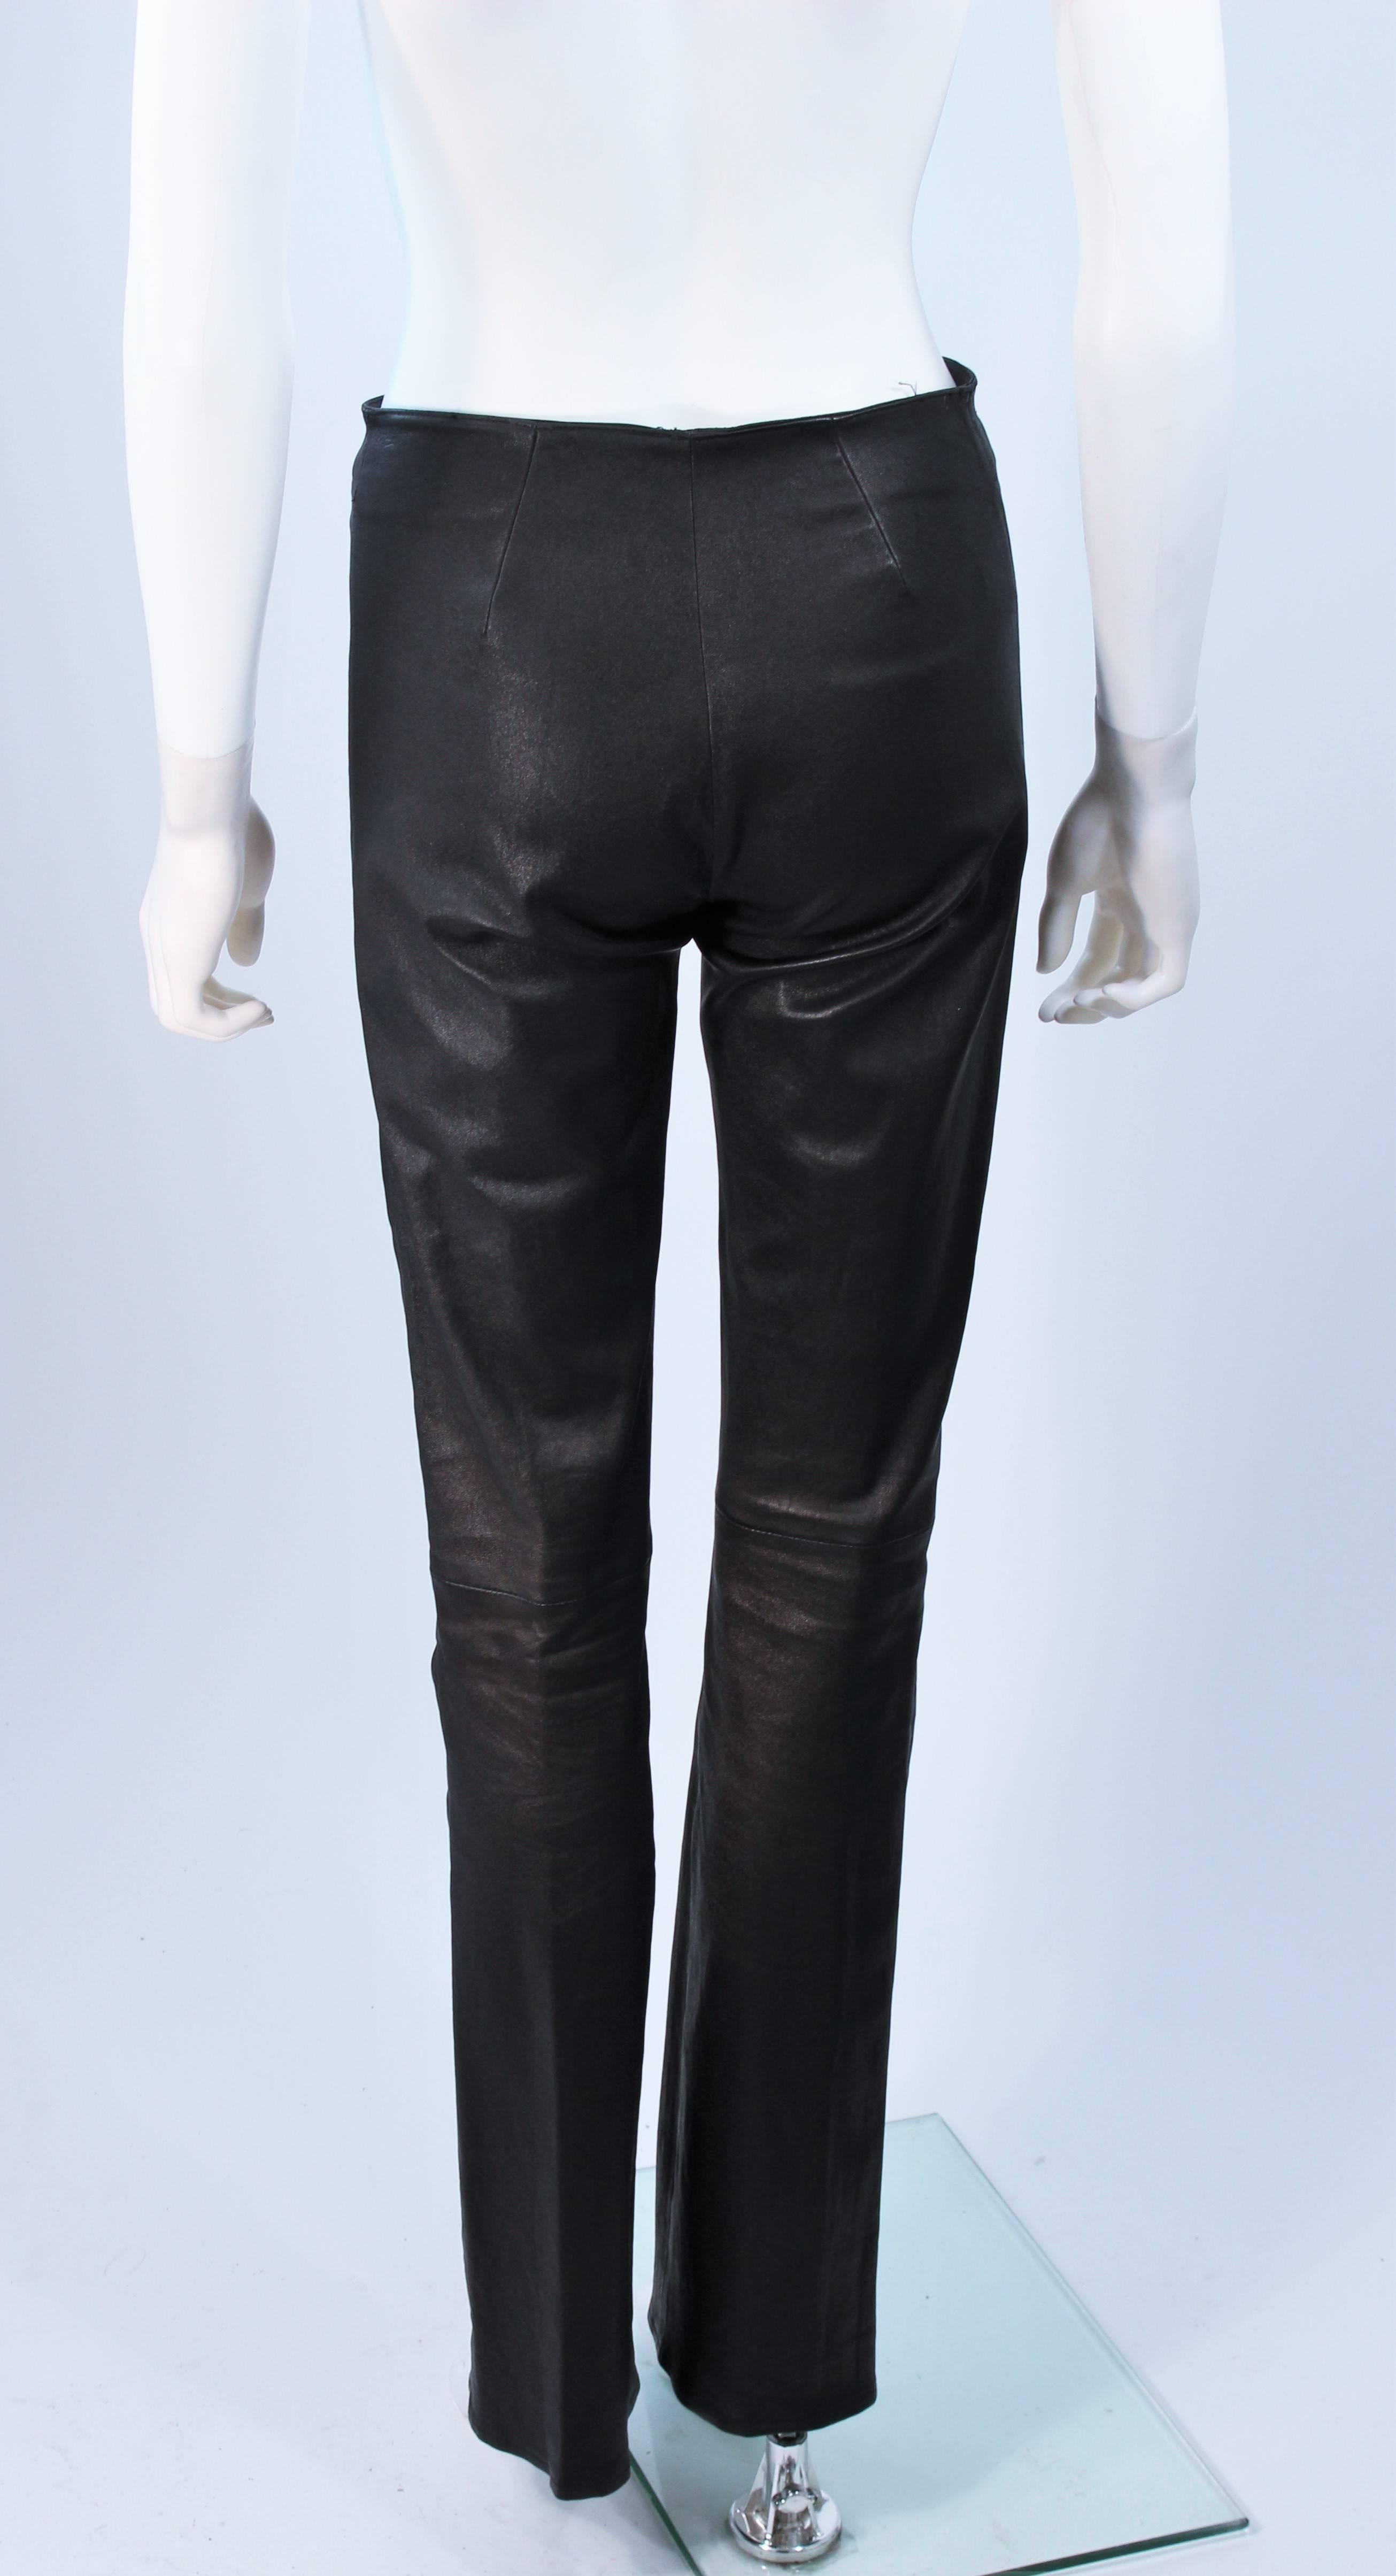 CHROME HEARTS Black Stretch Leather Boot Cut Pants Size 4 1